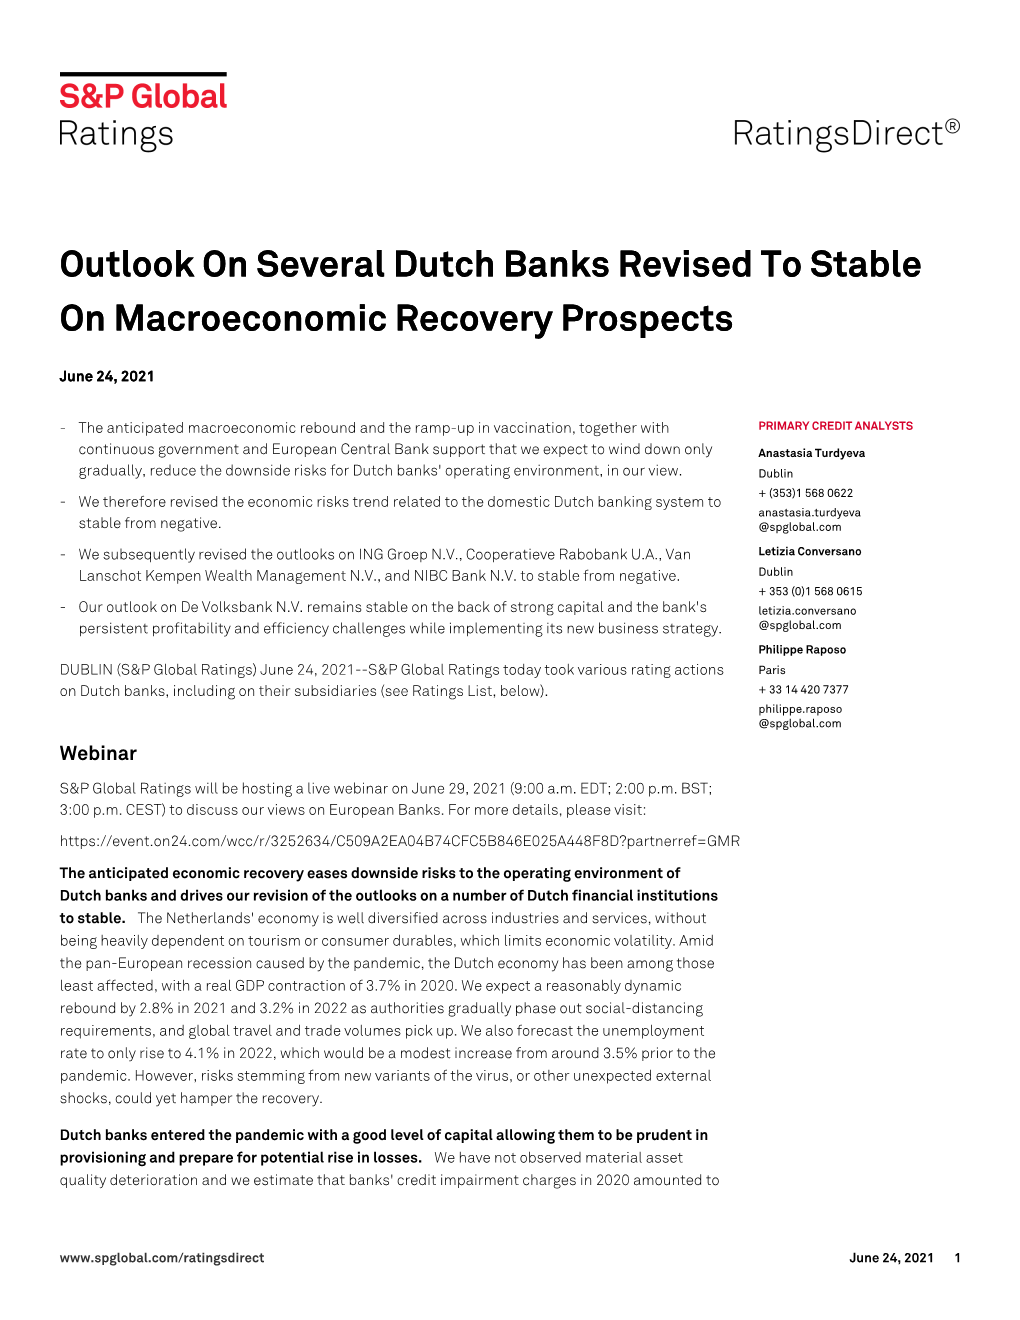 Outlook on Several Dutch Banks Revised to Stable on Macroeconomic Recovery Prospects